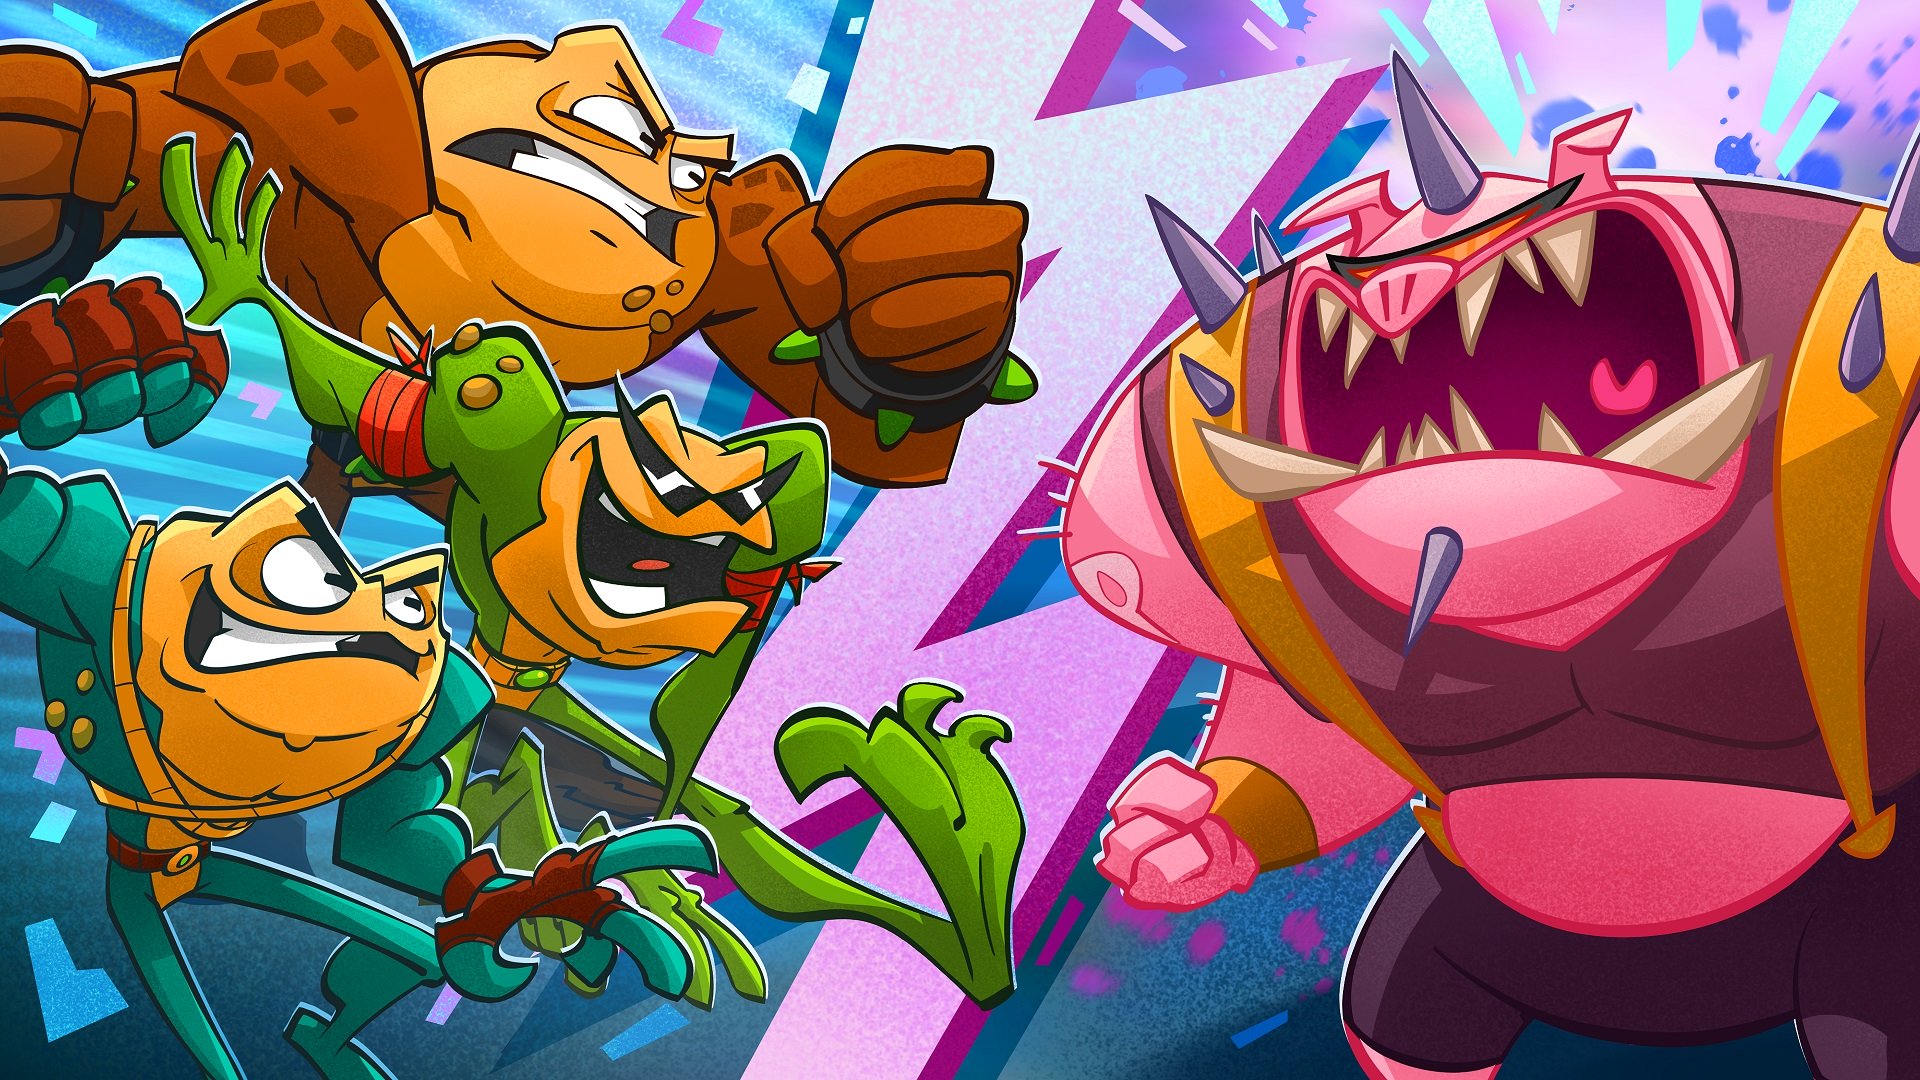 Most certainly this commence date trailer will sell you on Battletoads